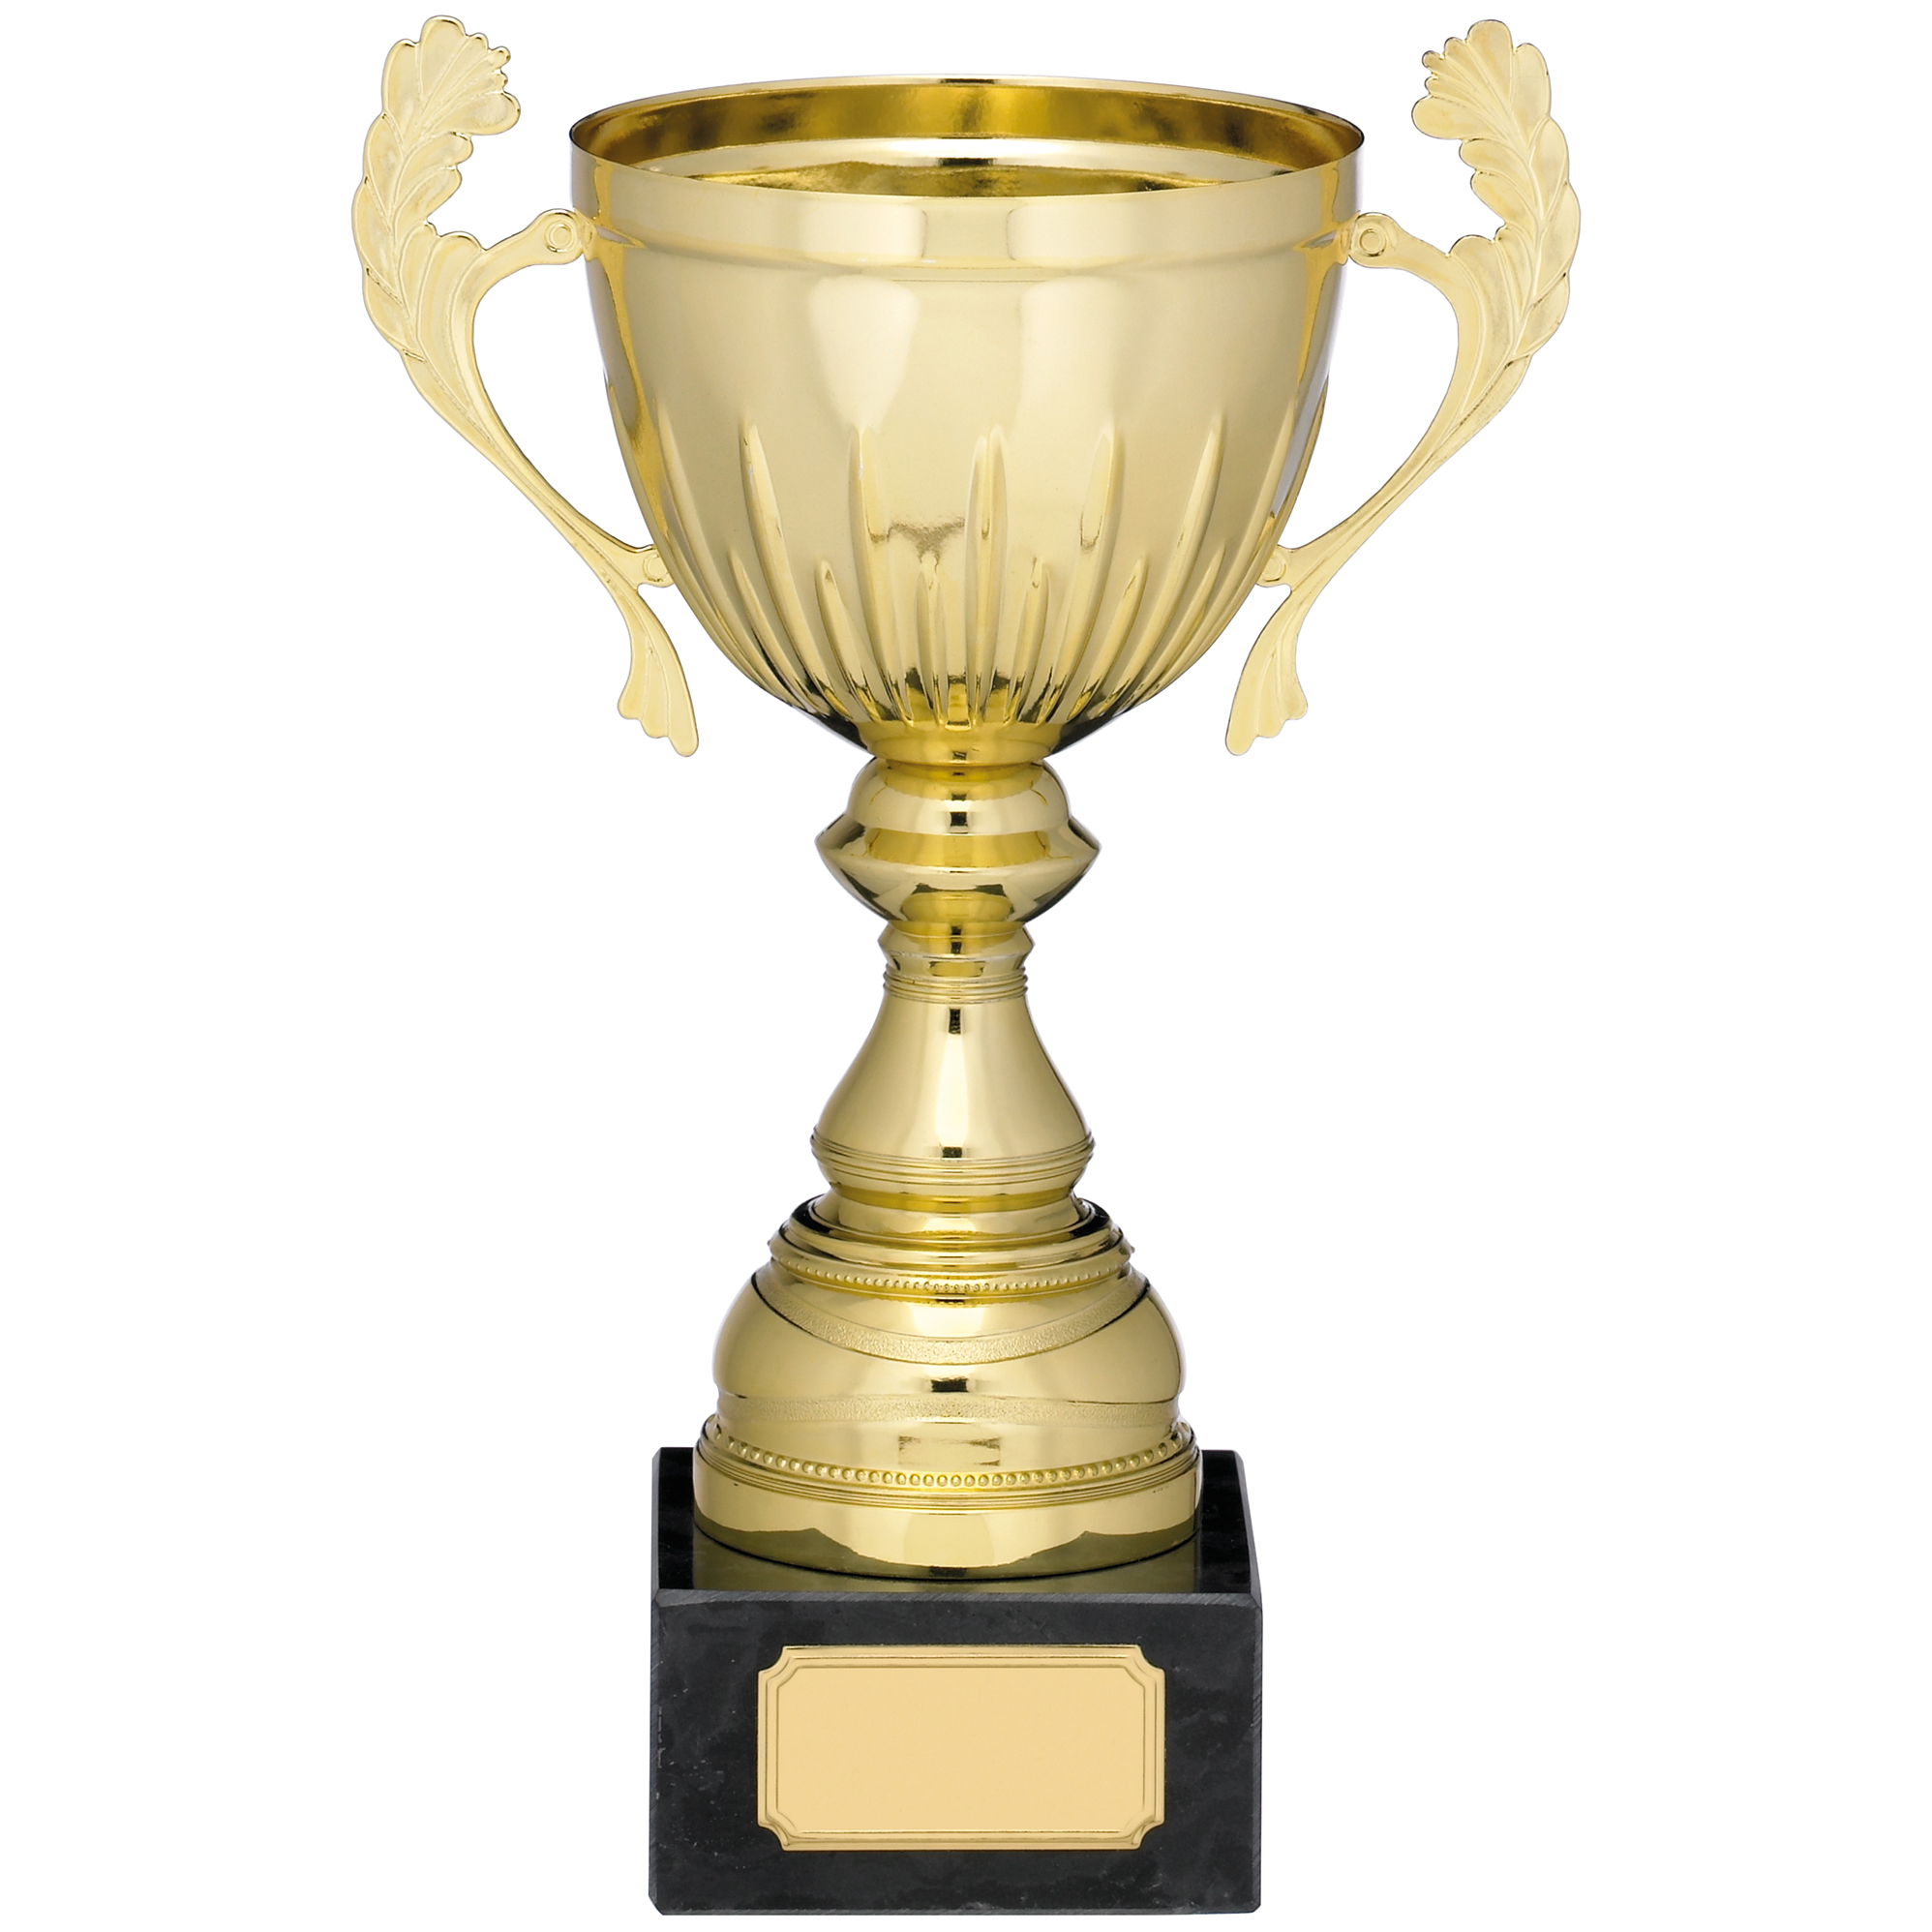 31cm GOLD CUP TROPHY WITH HANDLES